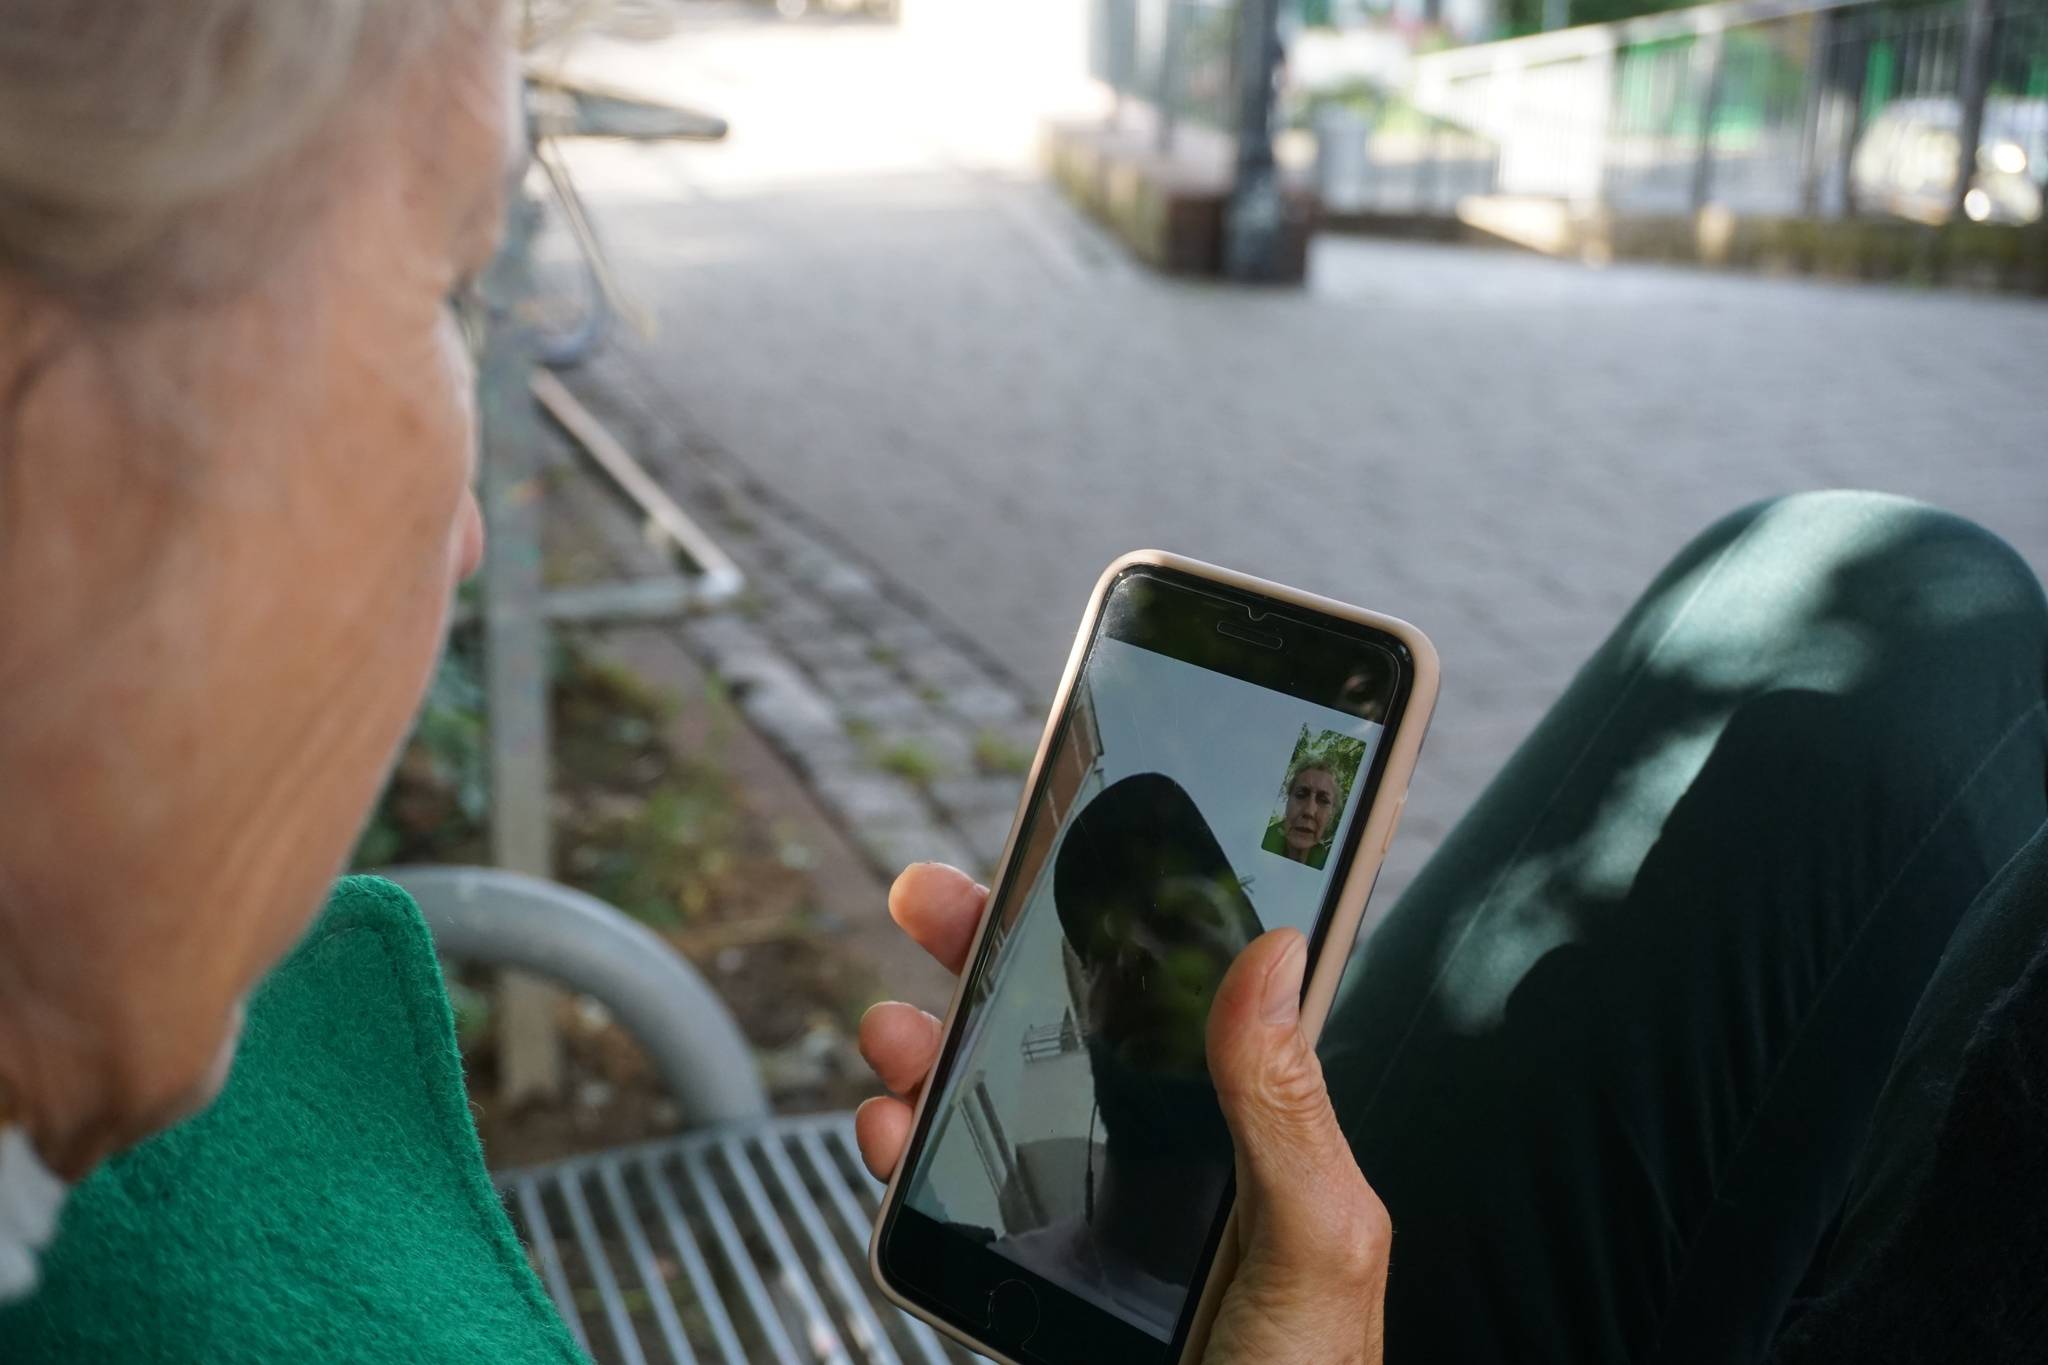 Study finds tech increases loneliness in Older Adults